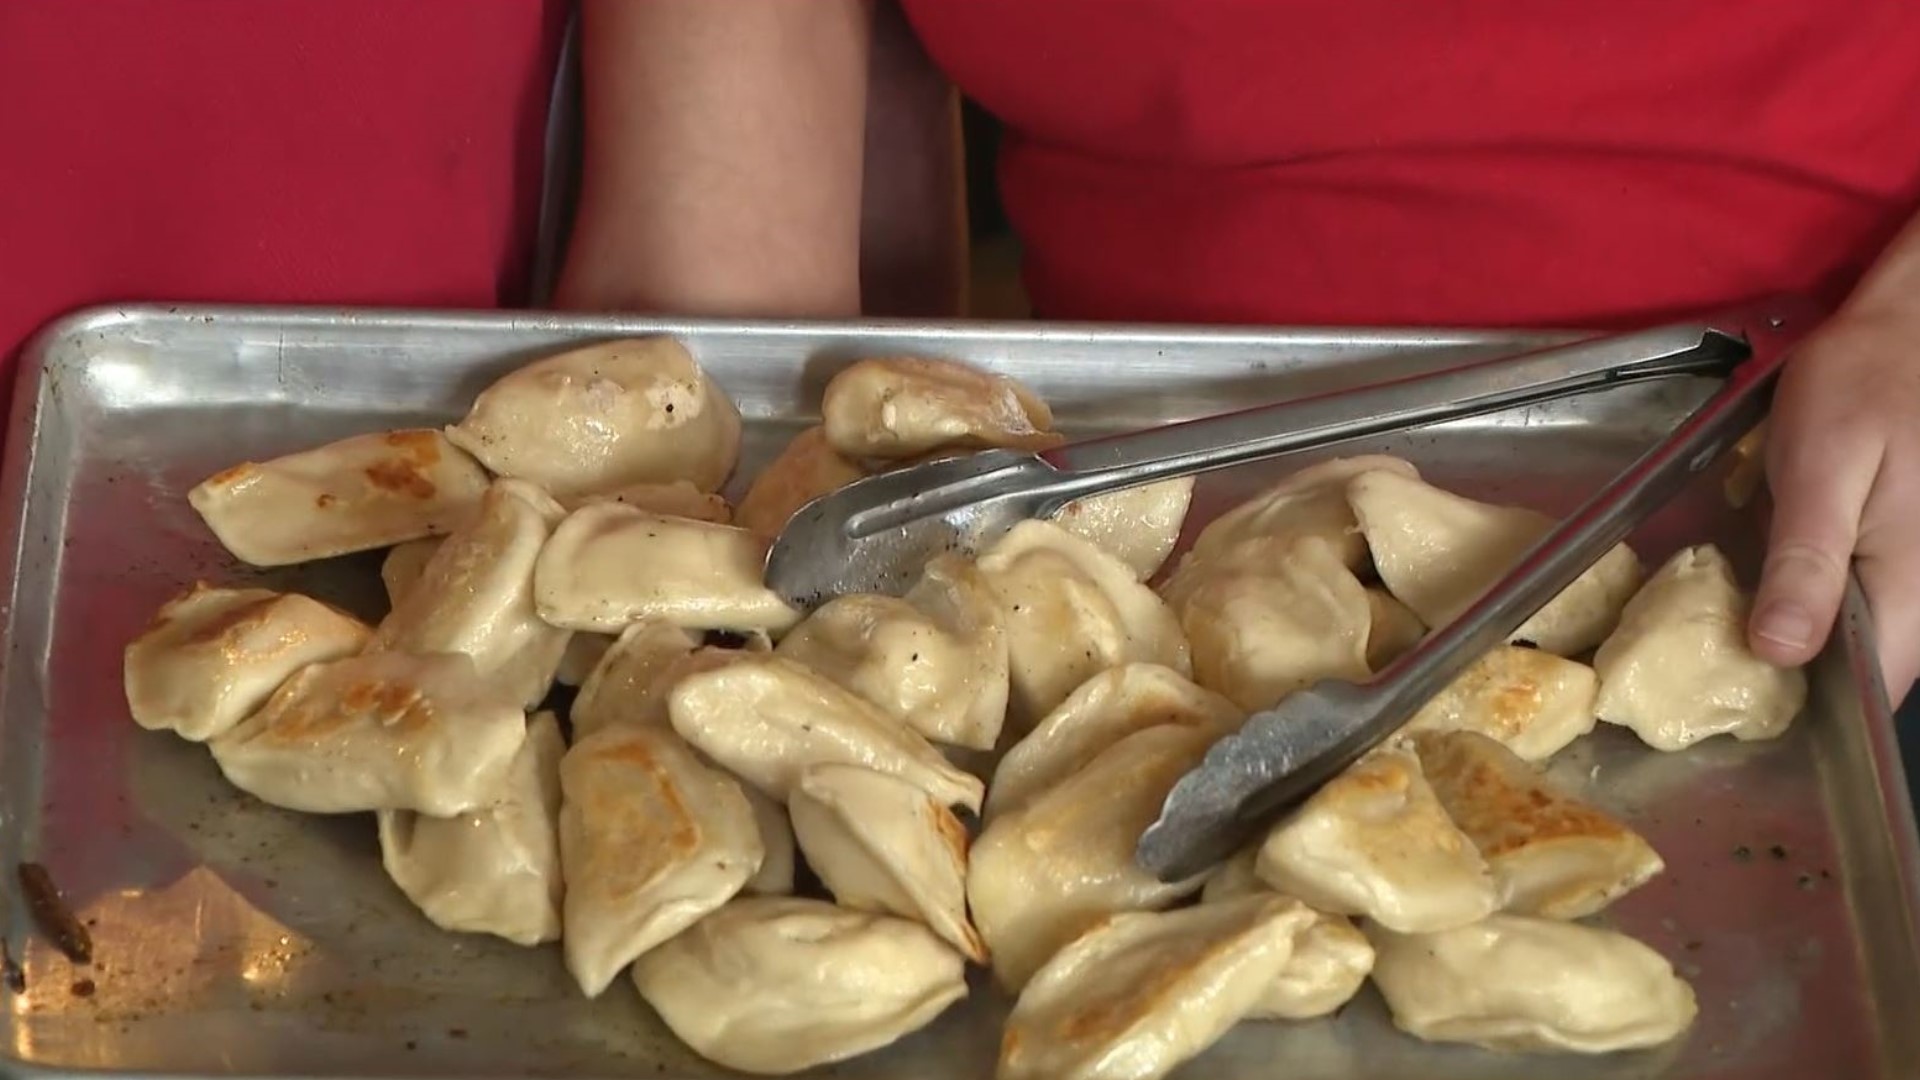 Organizers said Pierogi Fest was the perfect opportunity to stock up, just in time for Easter, which comes a little early this year.